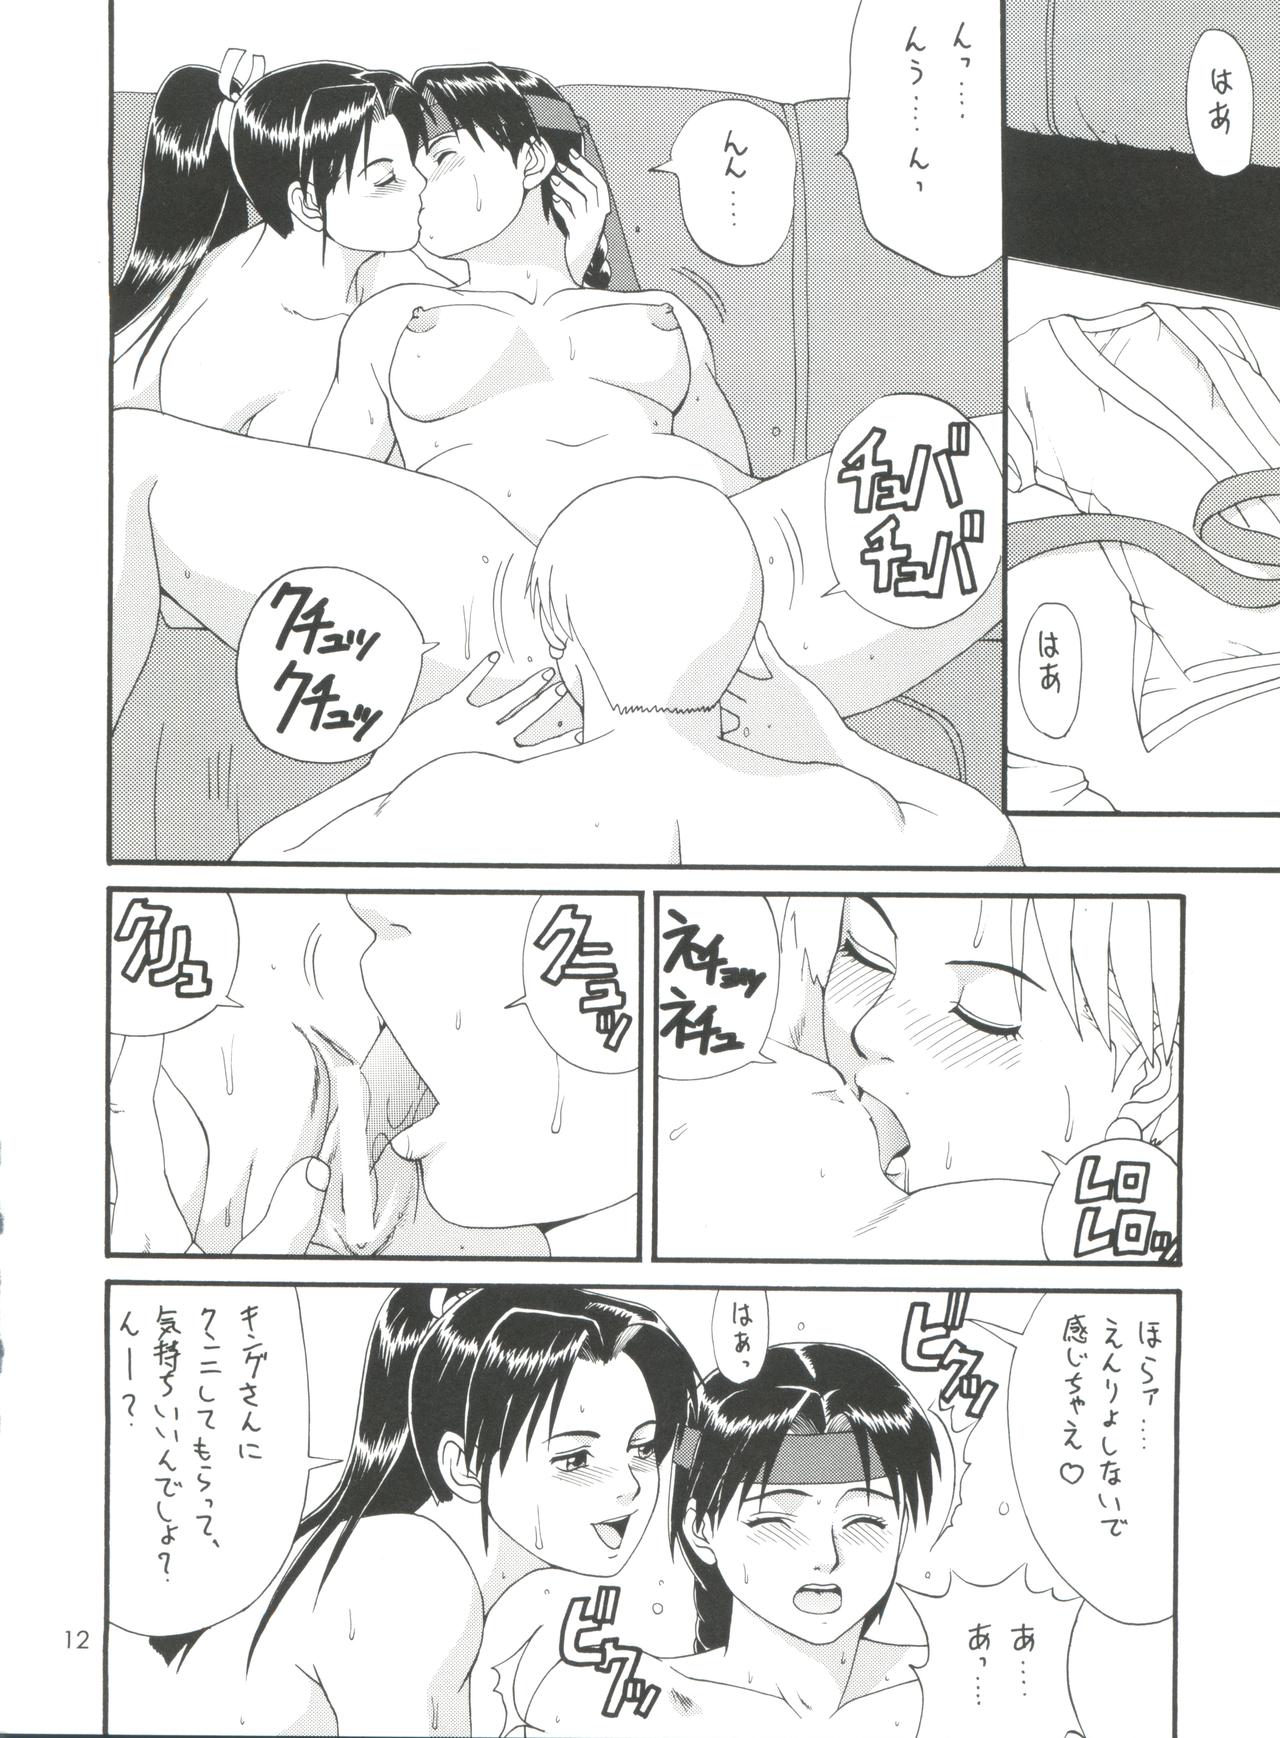 (CR24) [Saigado (Ishoku Dougen)] The Yuri & Friends '98 (King of Fighters) page 11 full